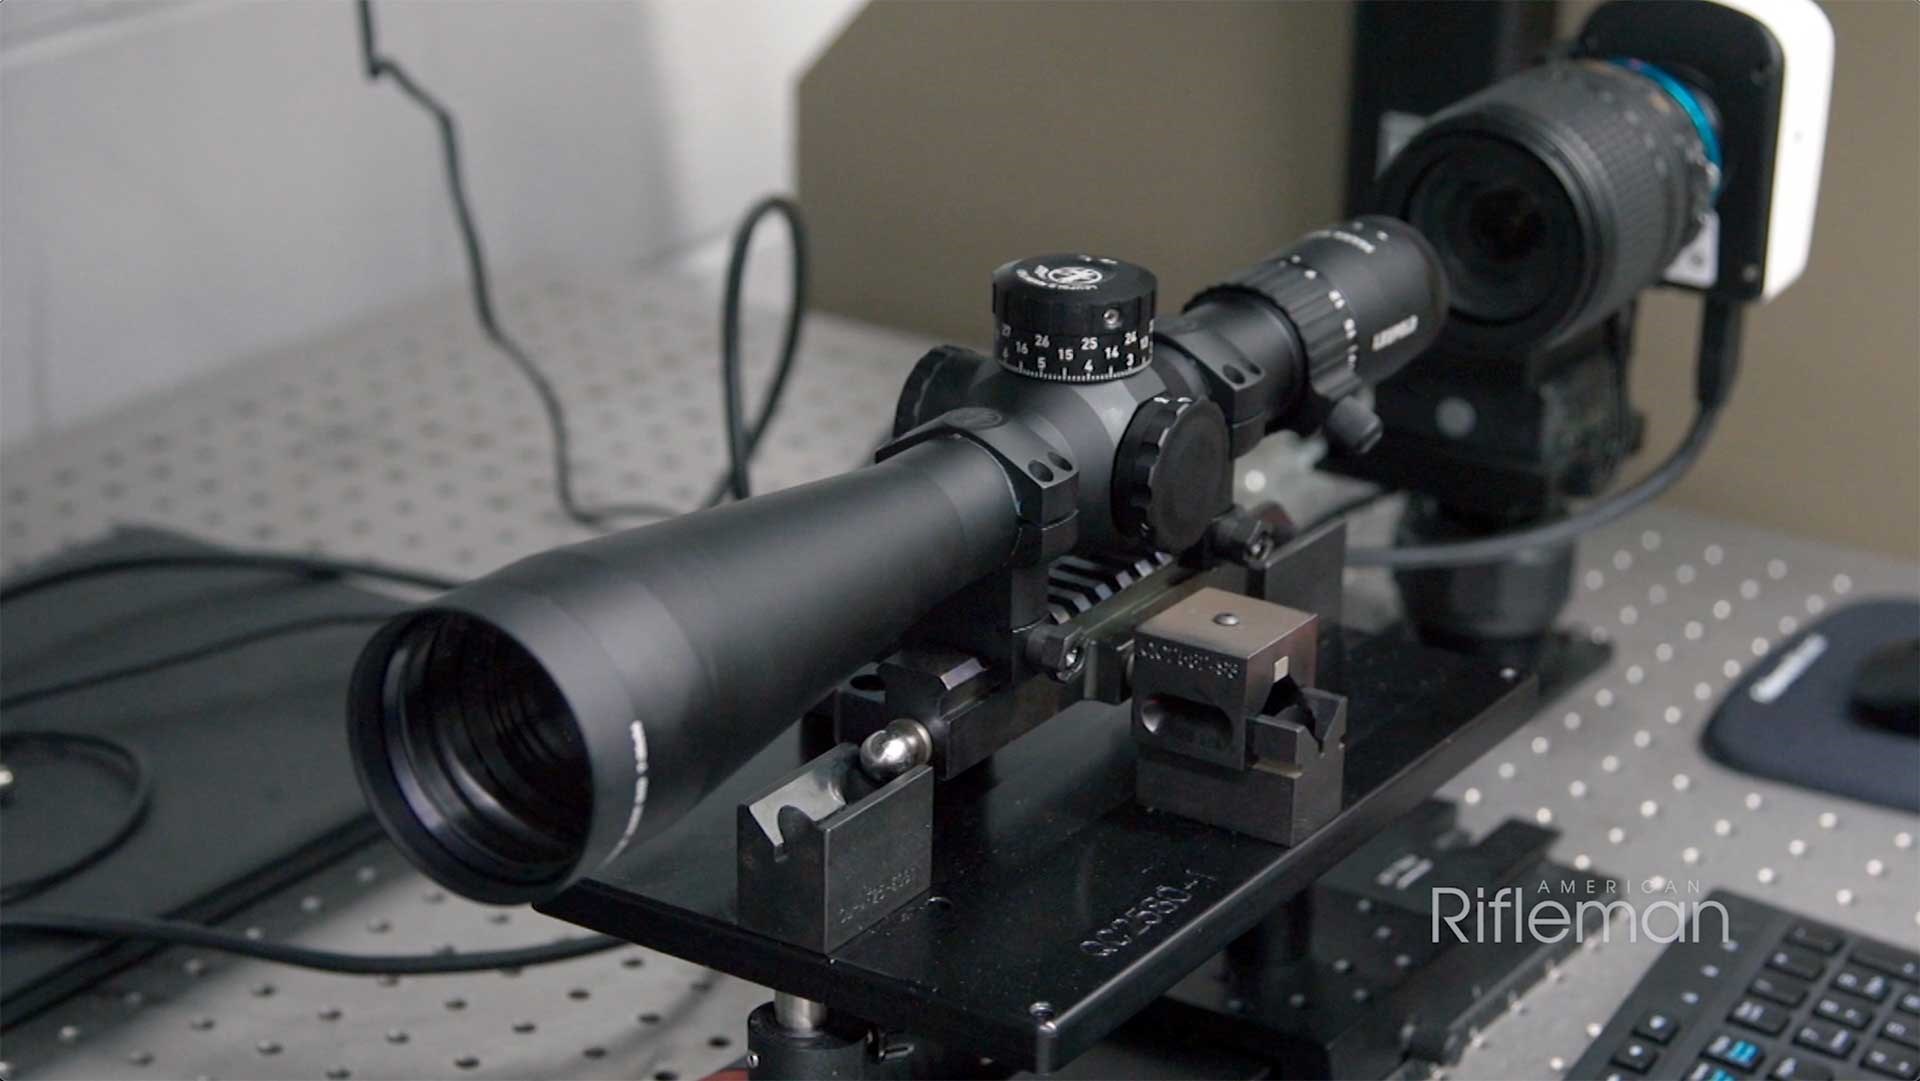 Leupold Mark 5HD riflescope on a testing table at the company's Oregon factory.